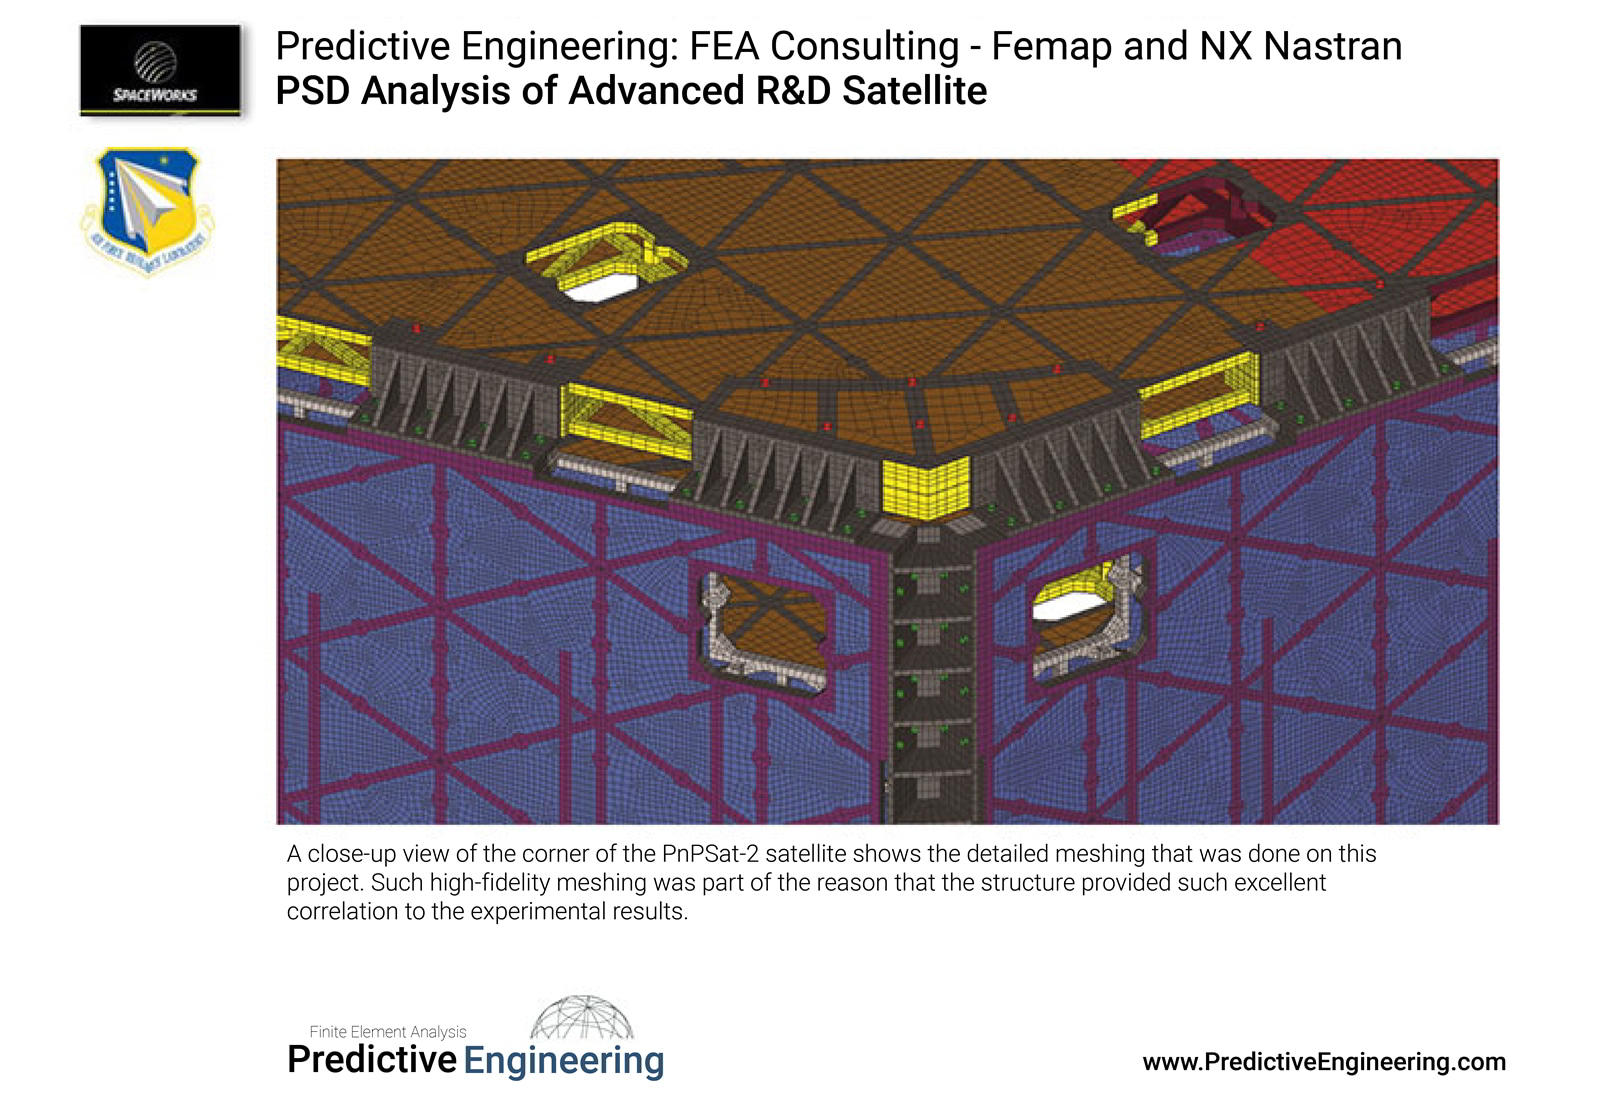 A close-up view of the corner of the PnPSat-2 satellite shows the detailed meshing that was done on this project.  Predictive Engineering FEA Consulting Engineers